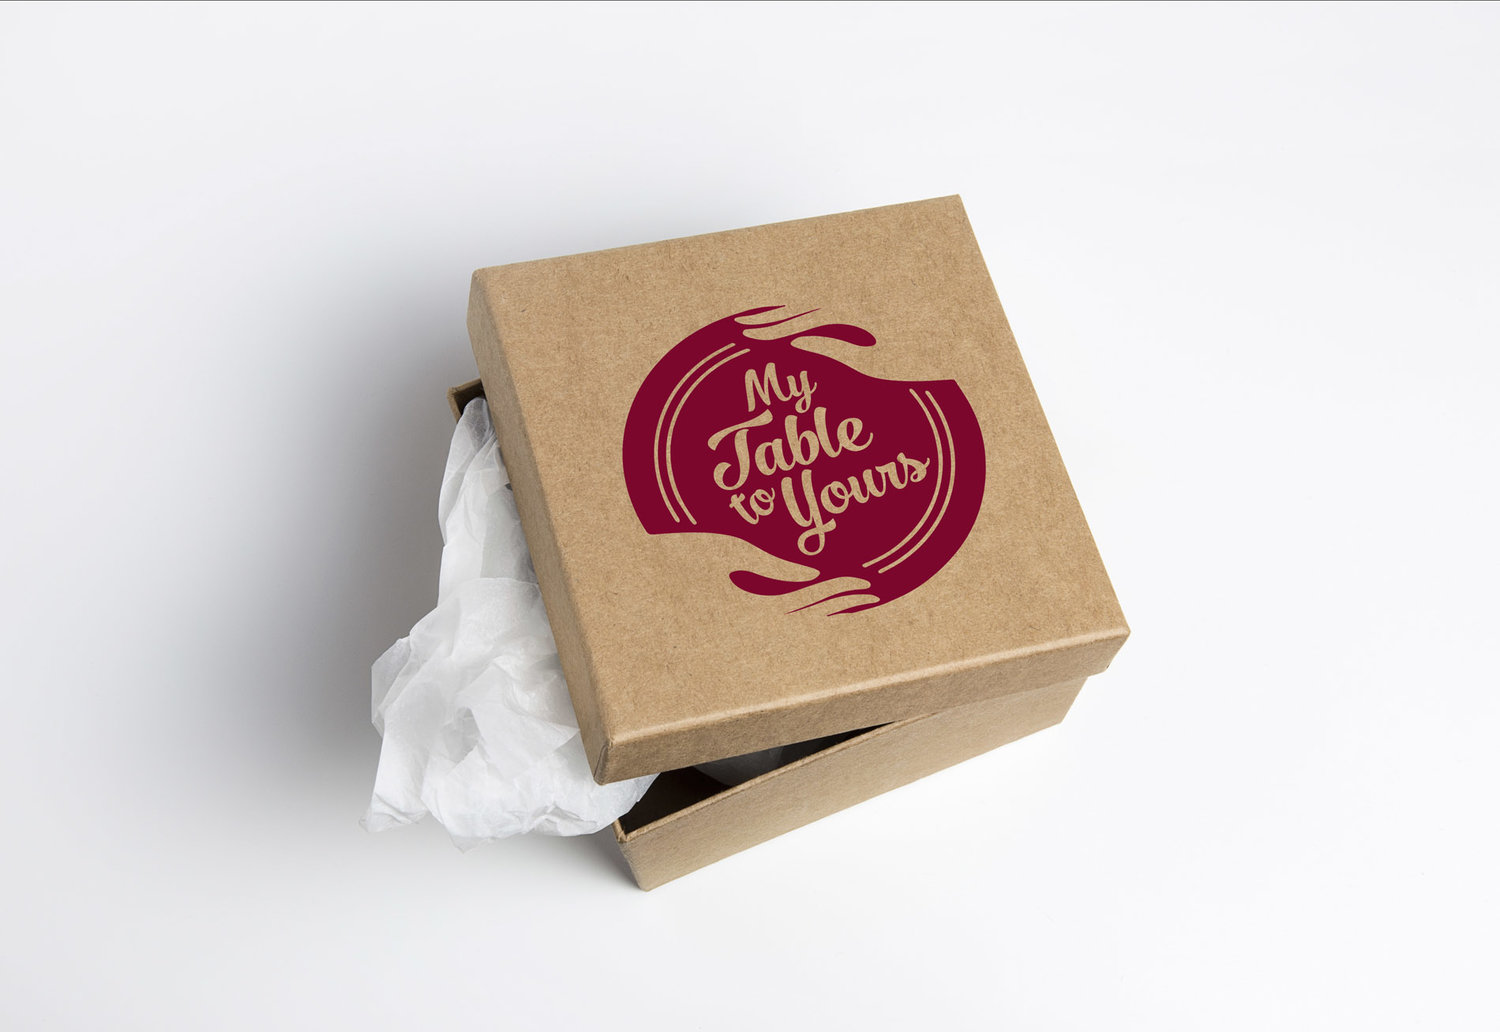 An elegant print design that MTTY uses for their product packaging